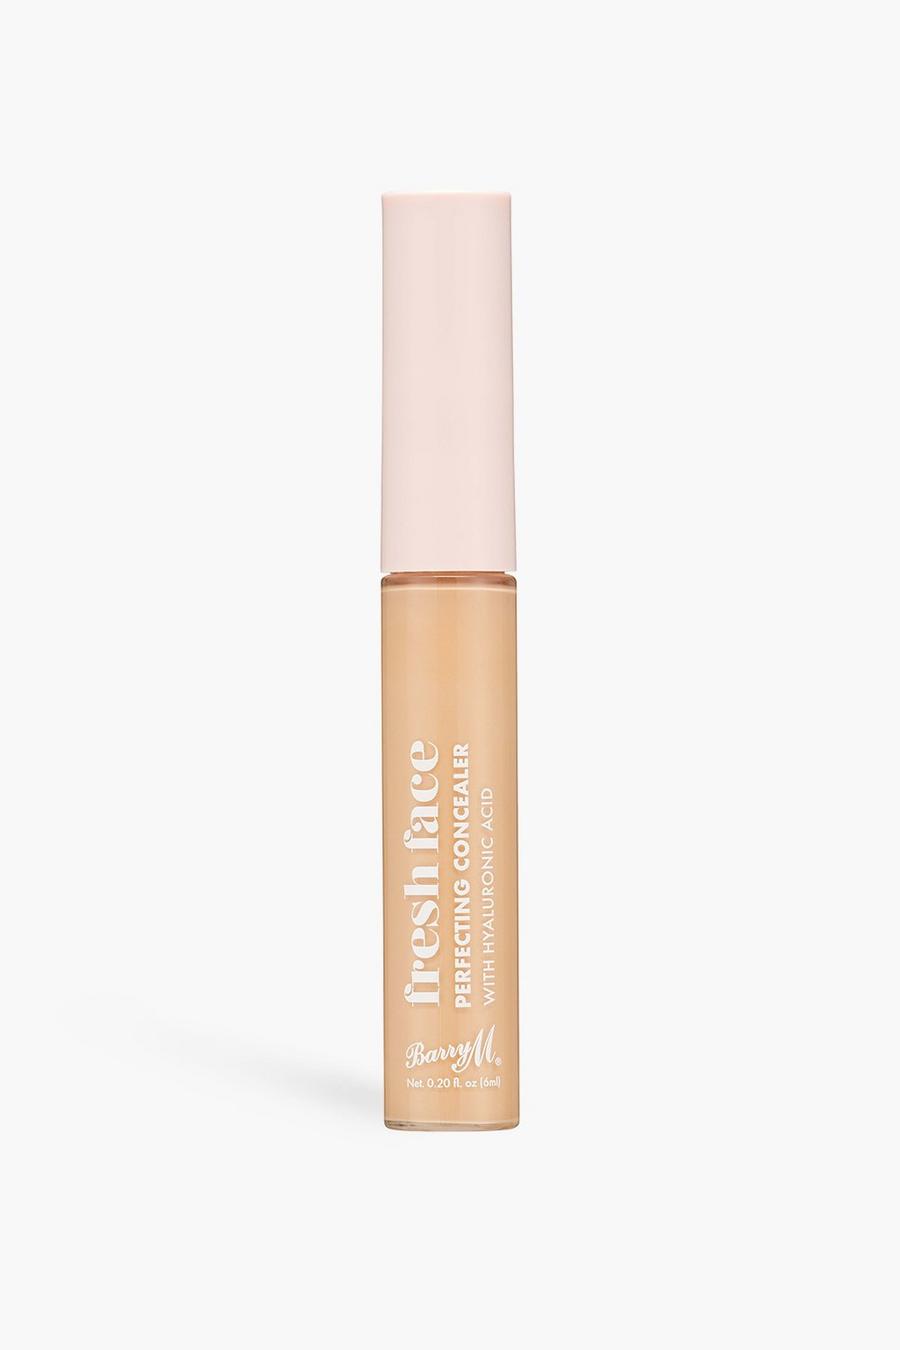 Tan marron Barry M Fresh Face Perfecting Concealer 4